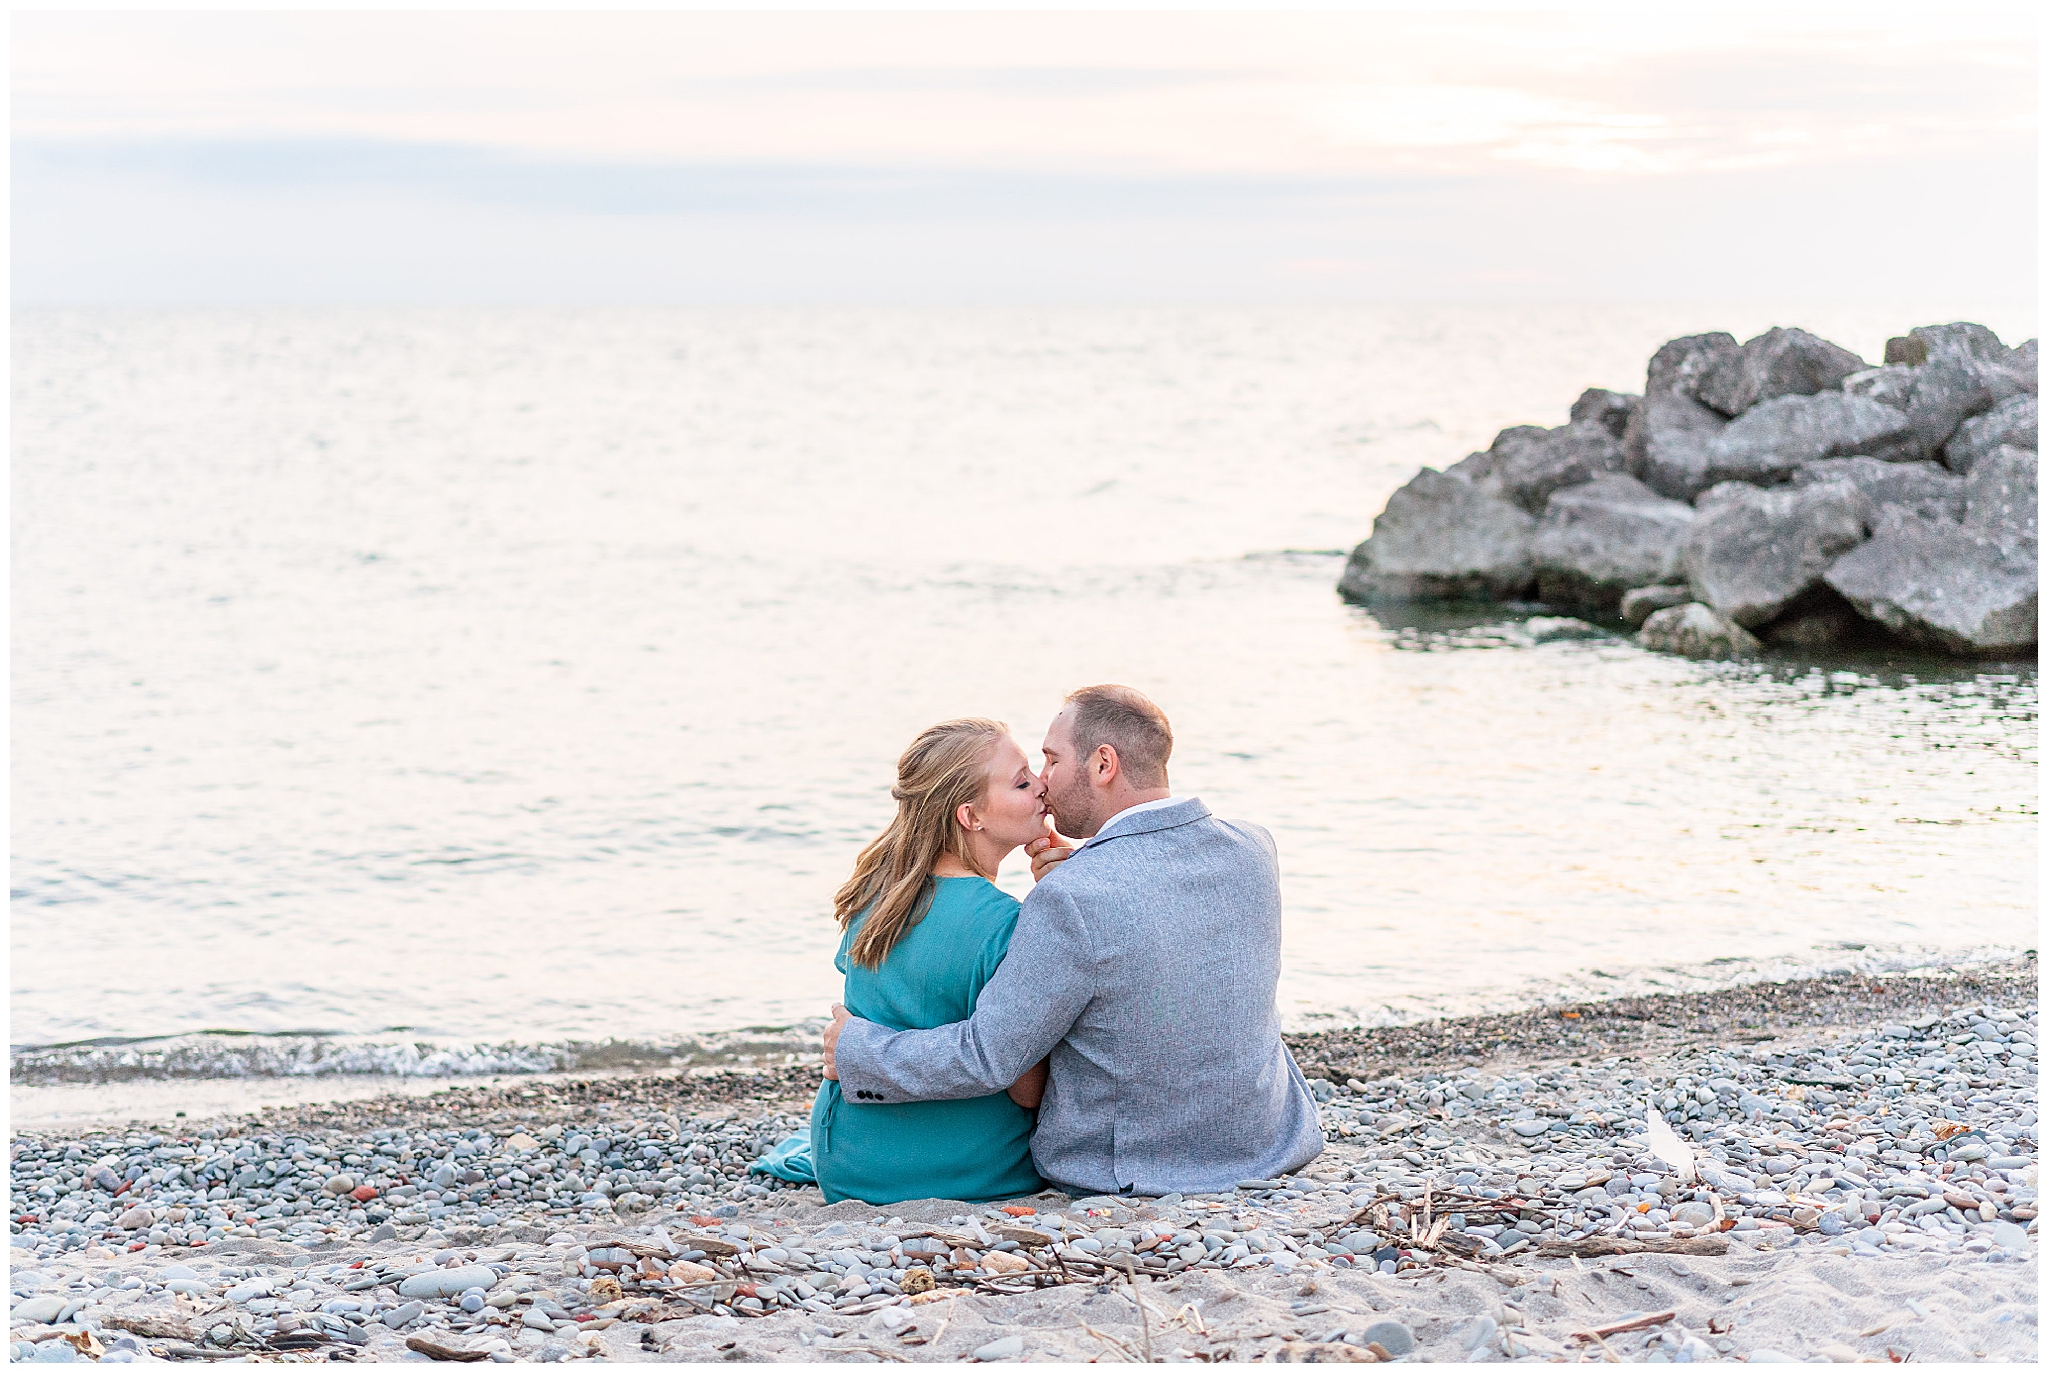 Romantic formal engagement portraits at Sims Park beach in Cleveland Ohio